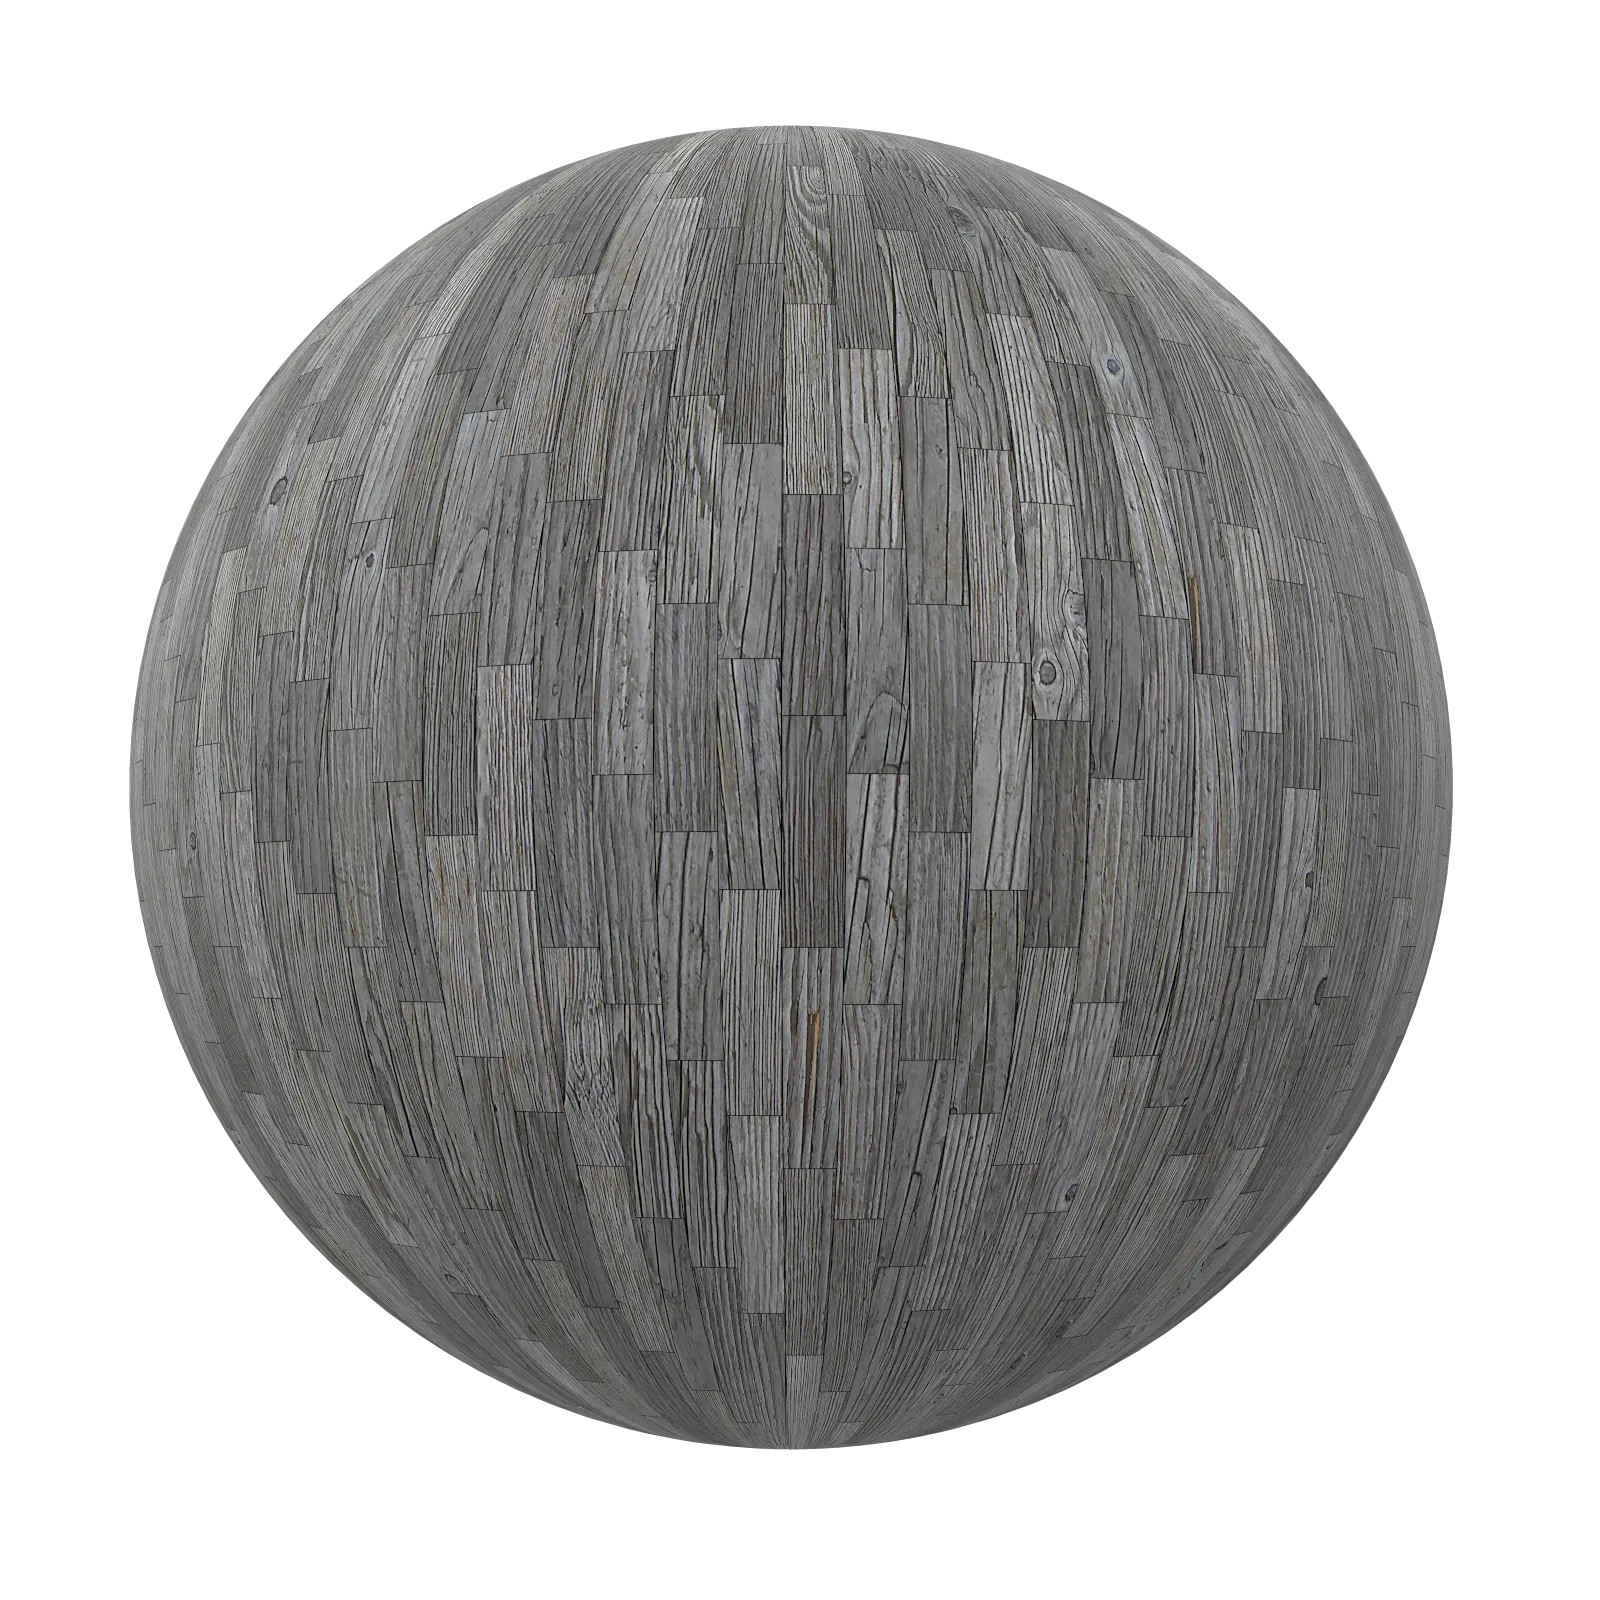 TEXTURES – WOOD – Old Wood Tiles 21